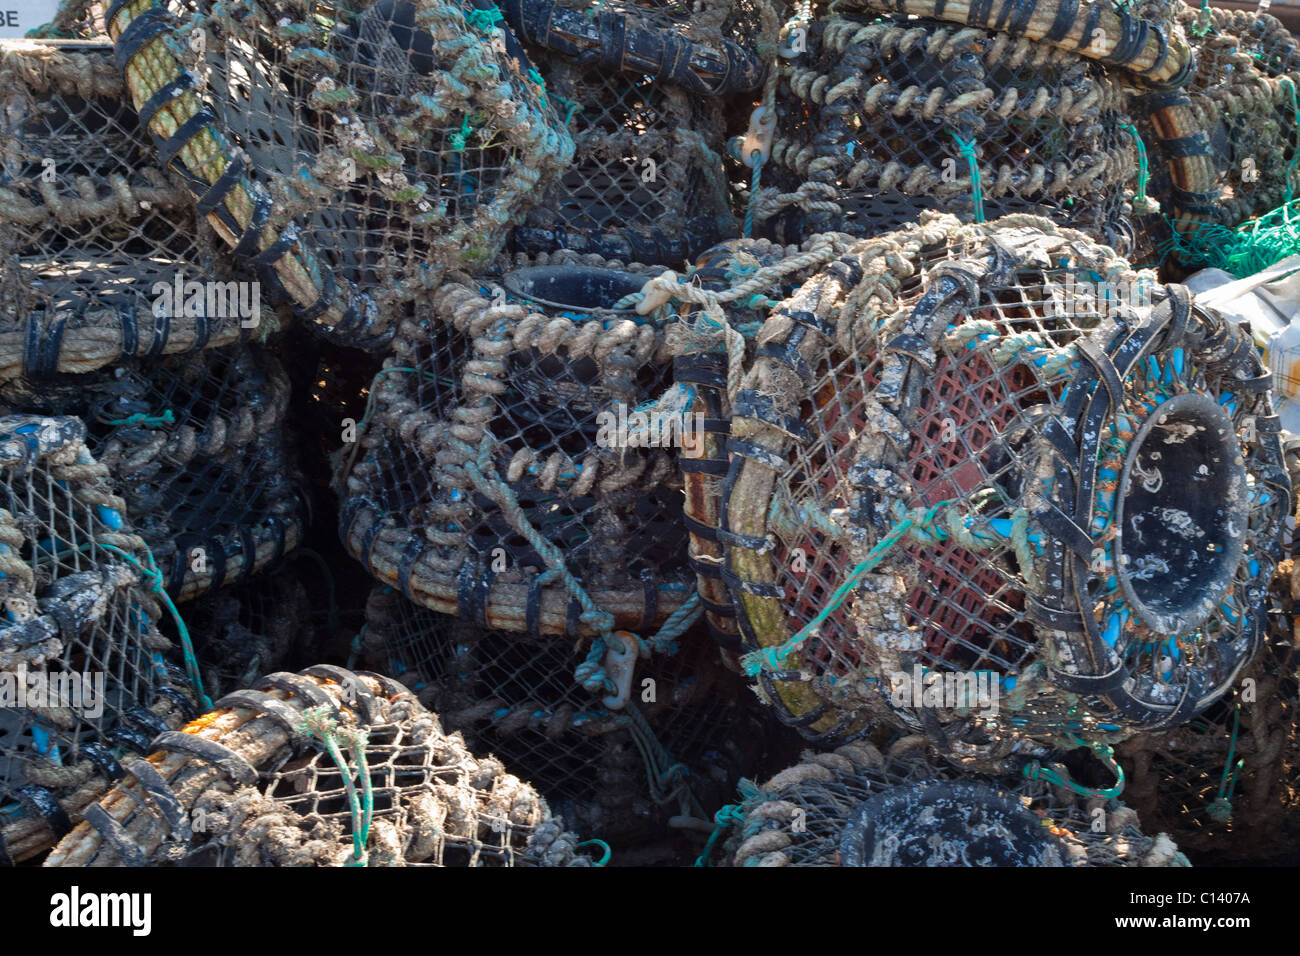 Lobster pots stacked in a haphazard way Stock Photo